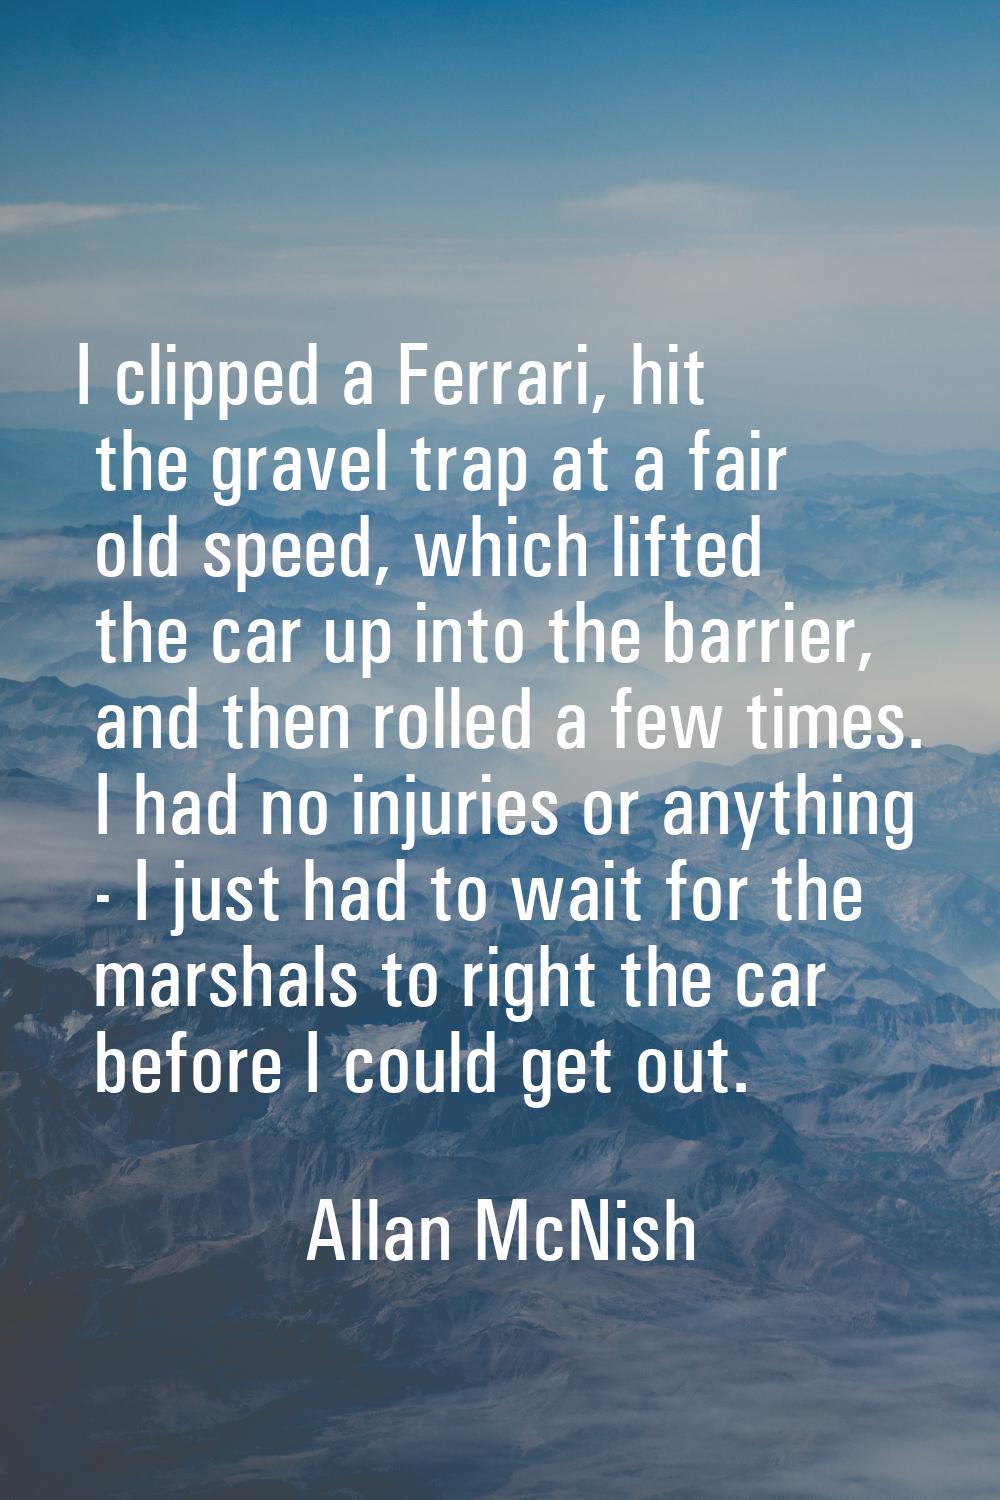 I clipped a Ferrari, hit the gravel trap at a fair old speed, which lifted the car up into the barr